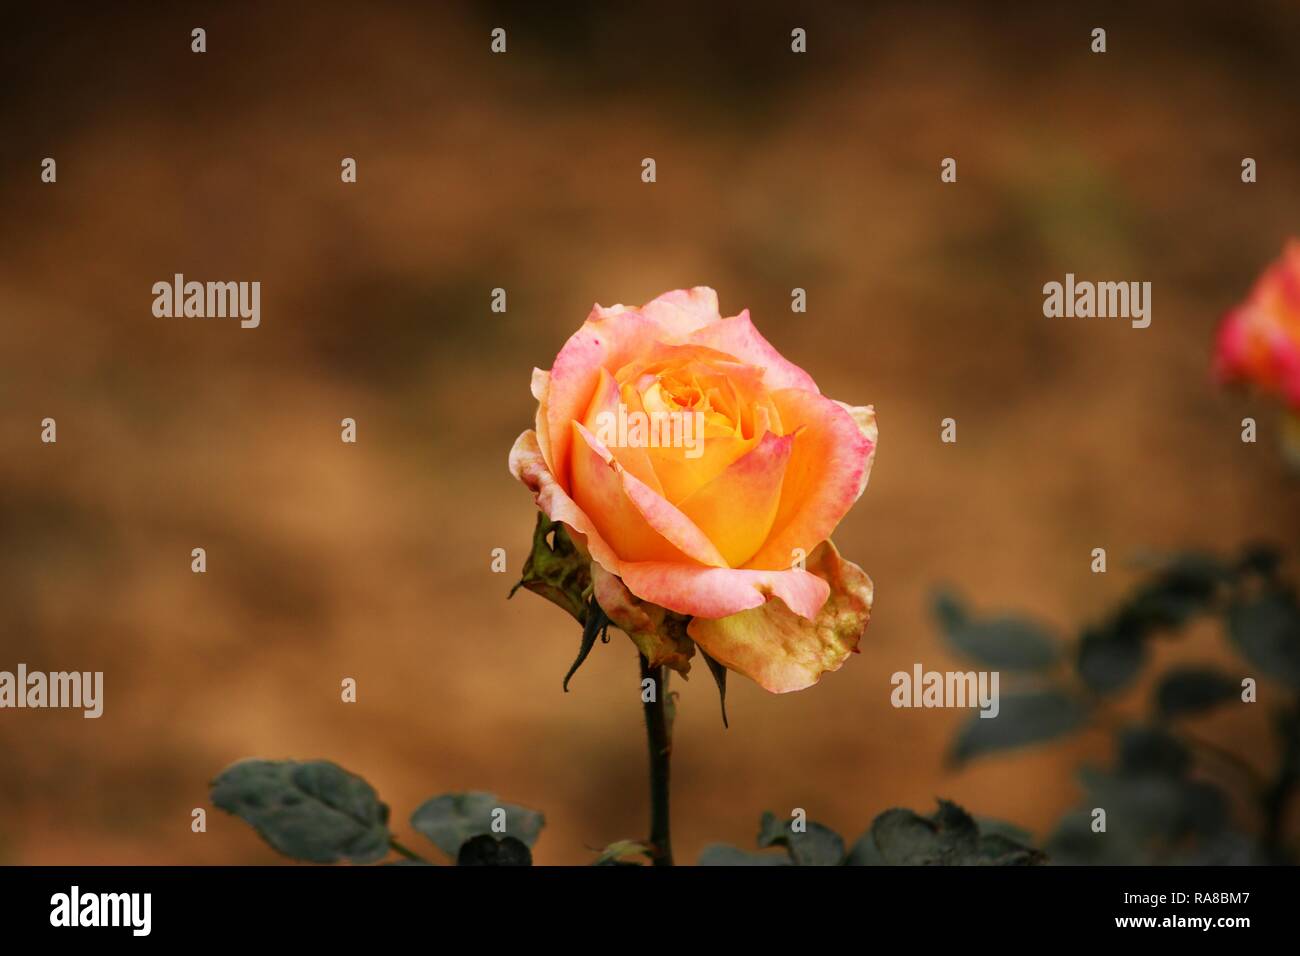 Rose with blur background Stock Photo